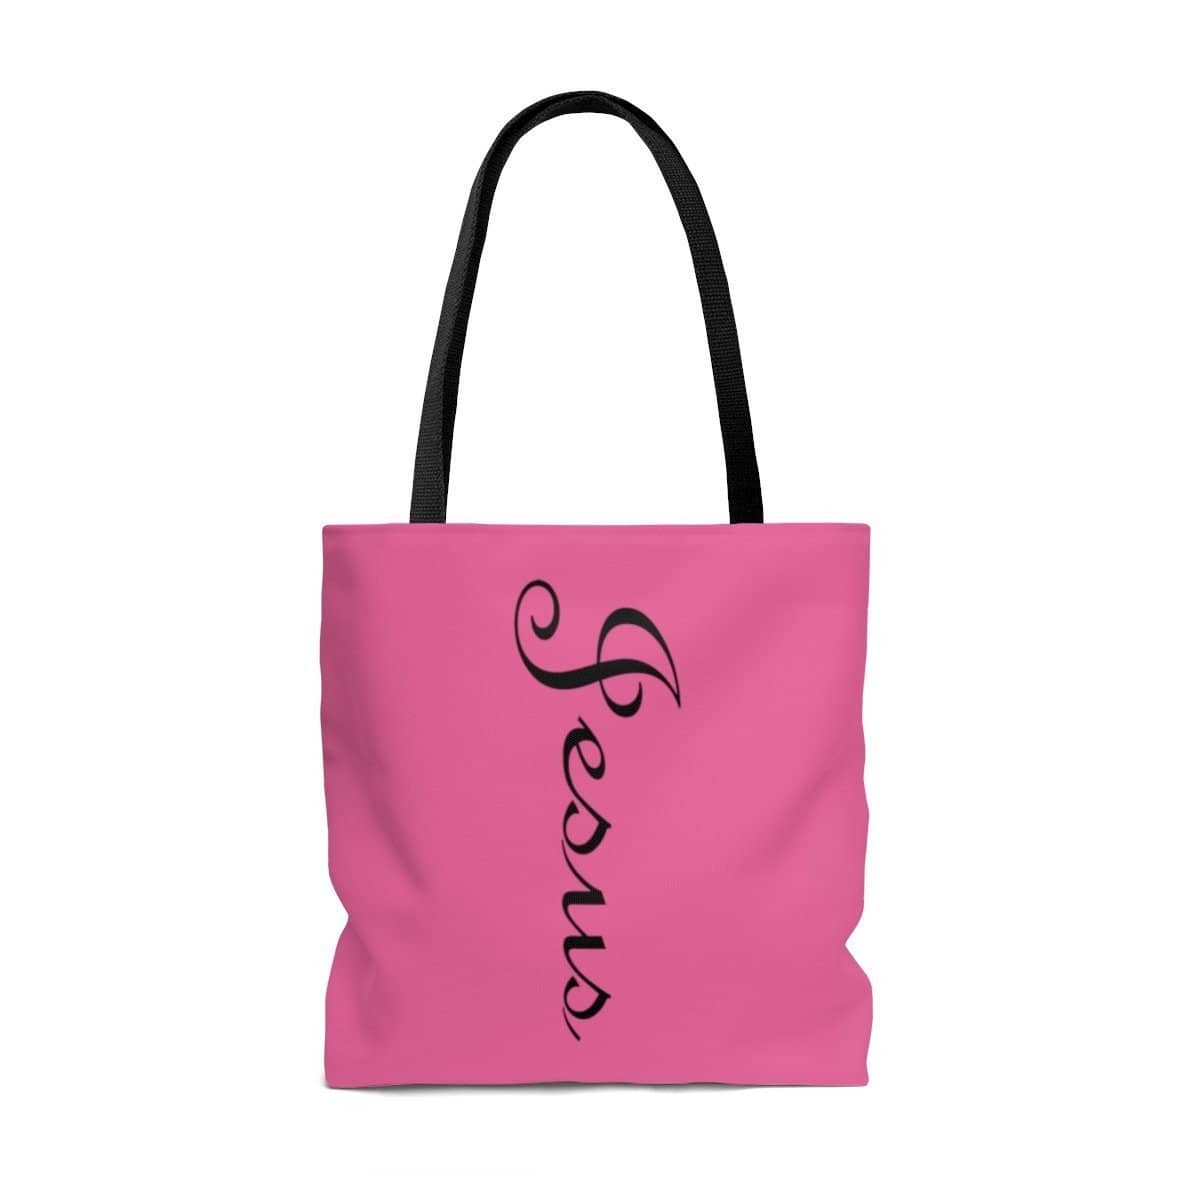 AOP Tote Bag Jesus Printed on both Sides Pink with a Black Handle in 3 Sizes Bags (3405842841700)